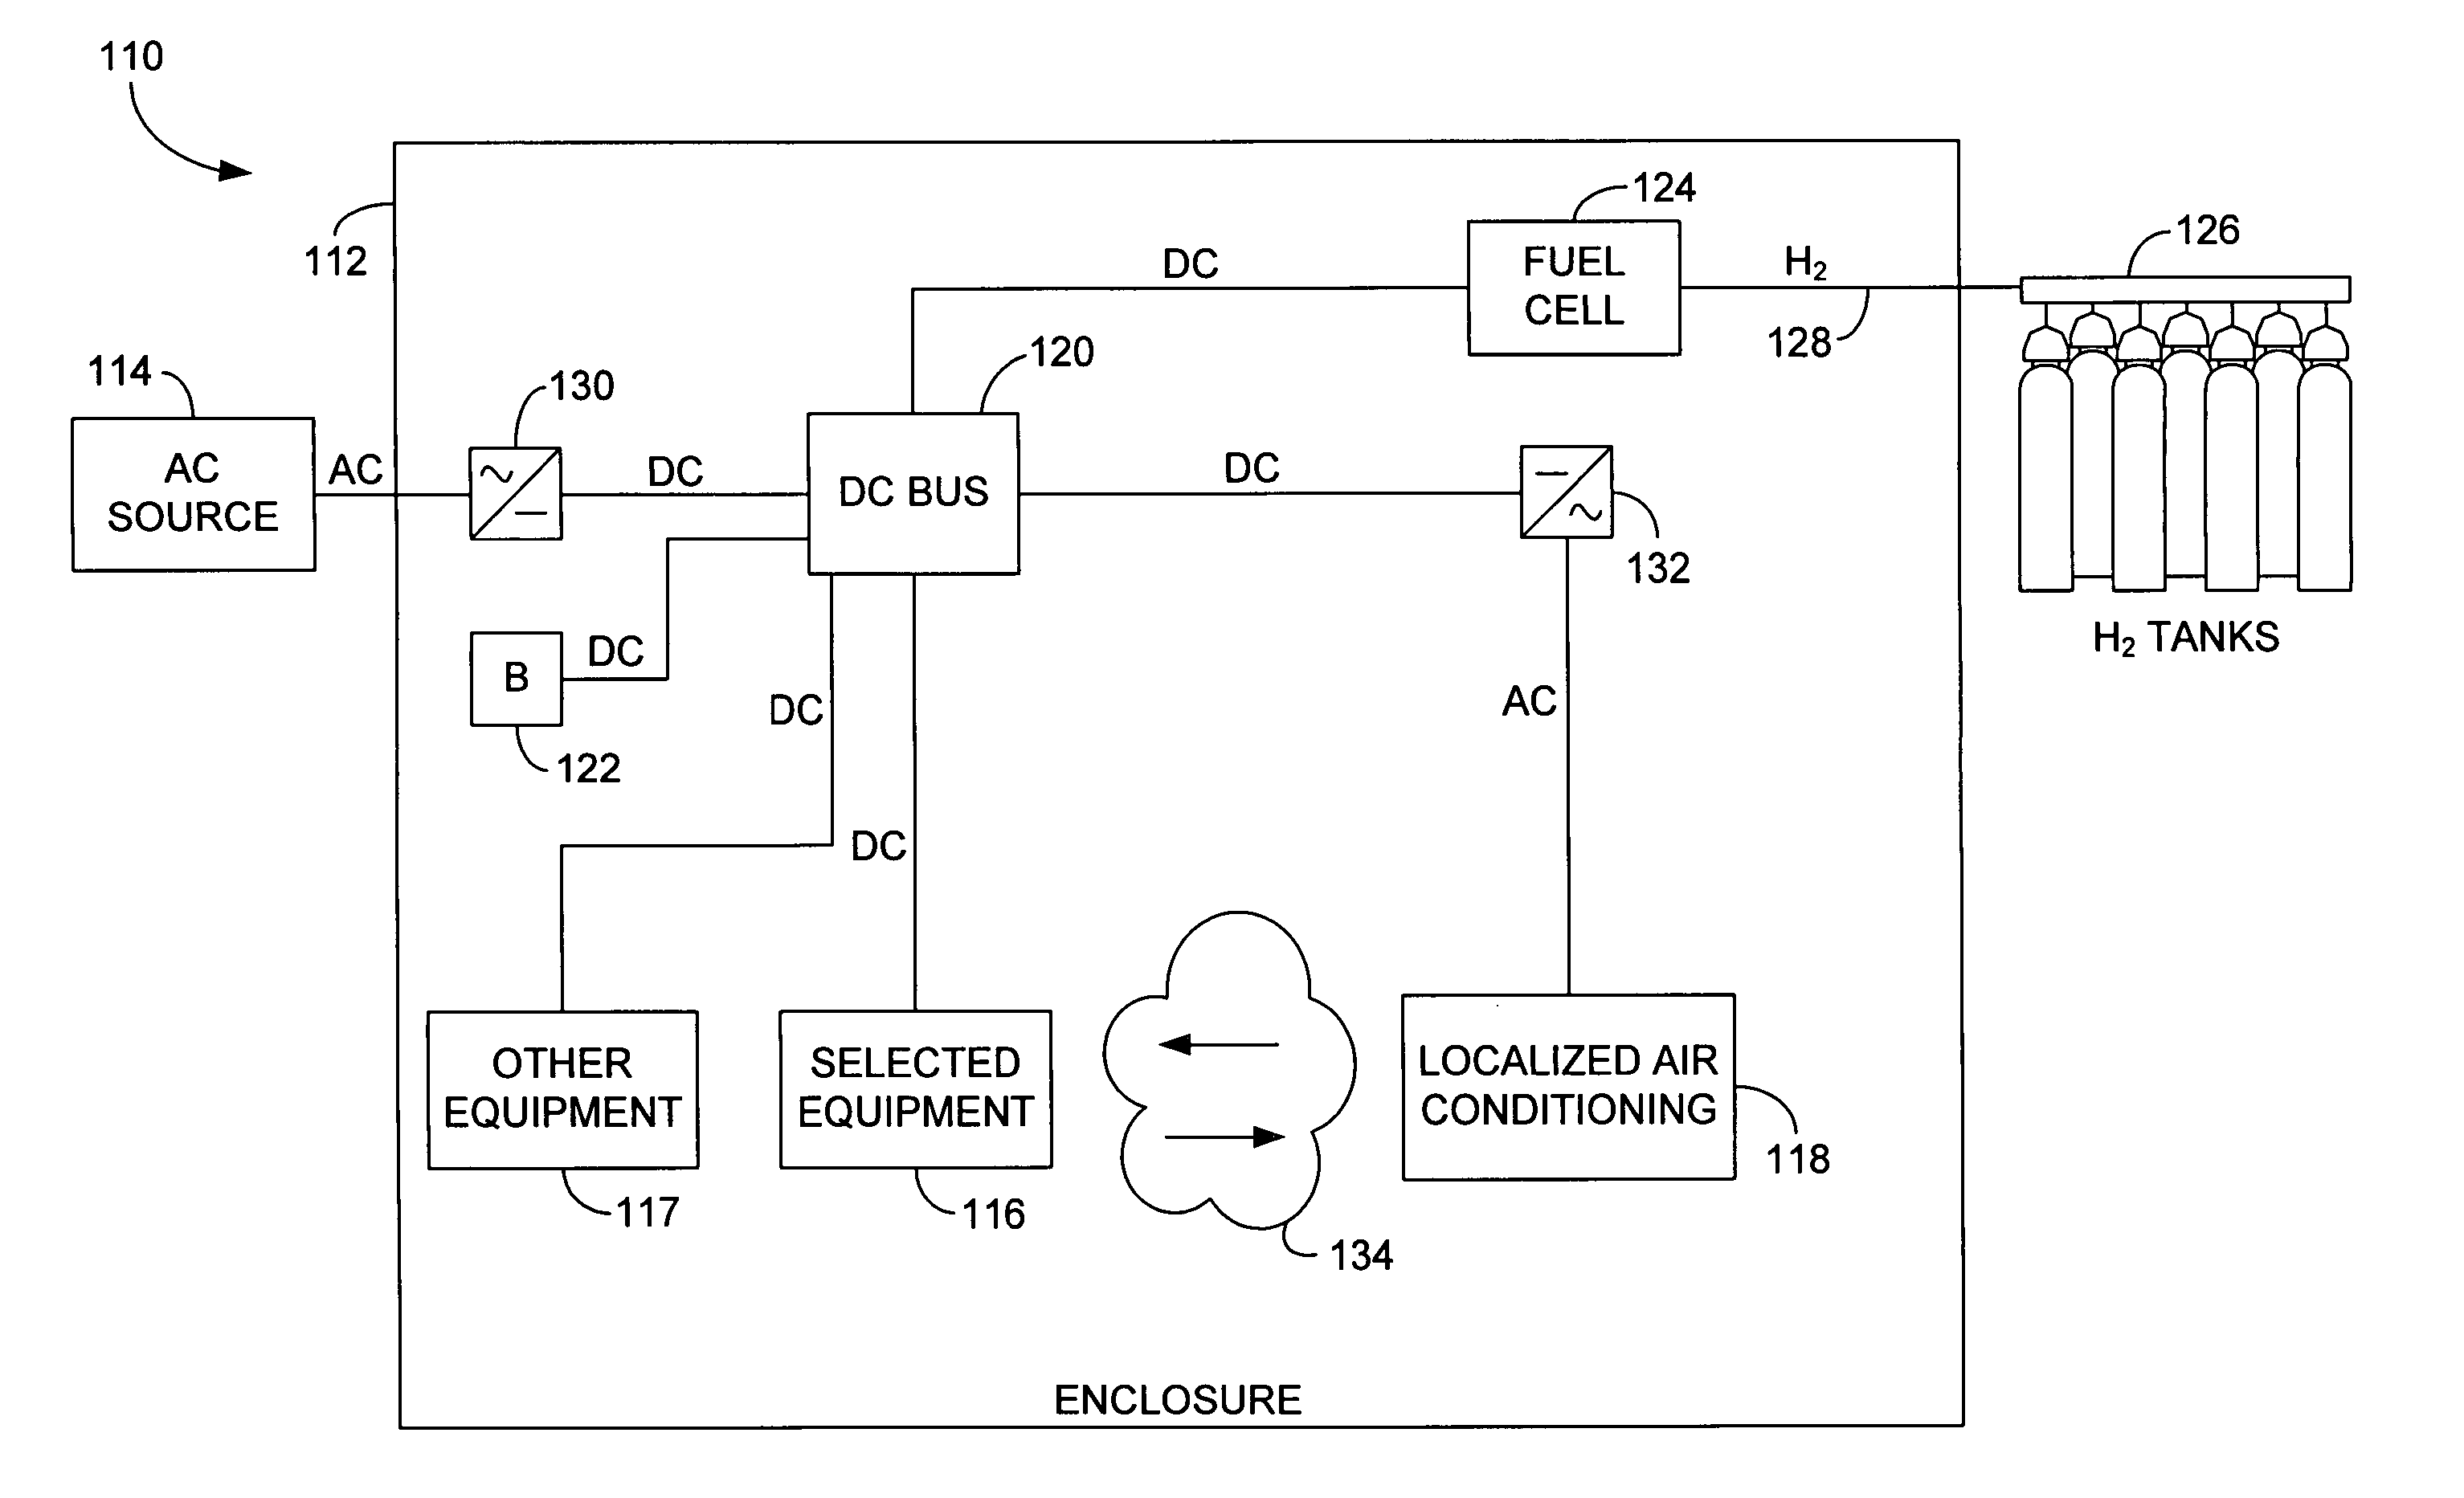 Power system with fuel cell and localized air-conditioning for computing equipment